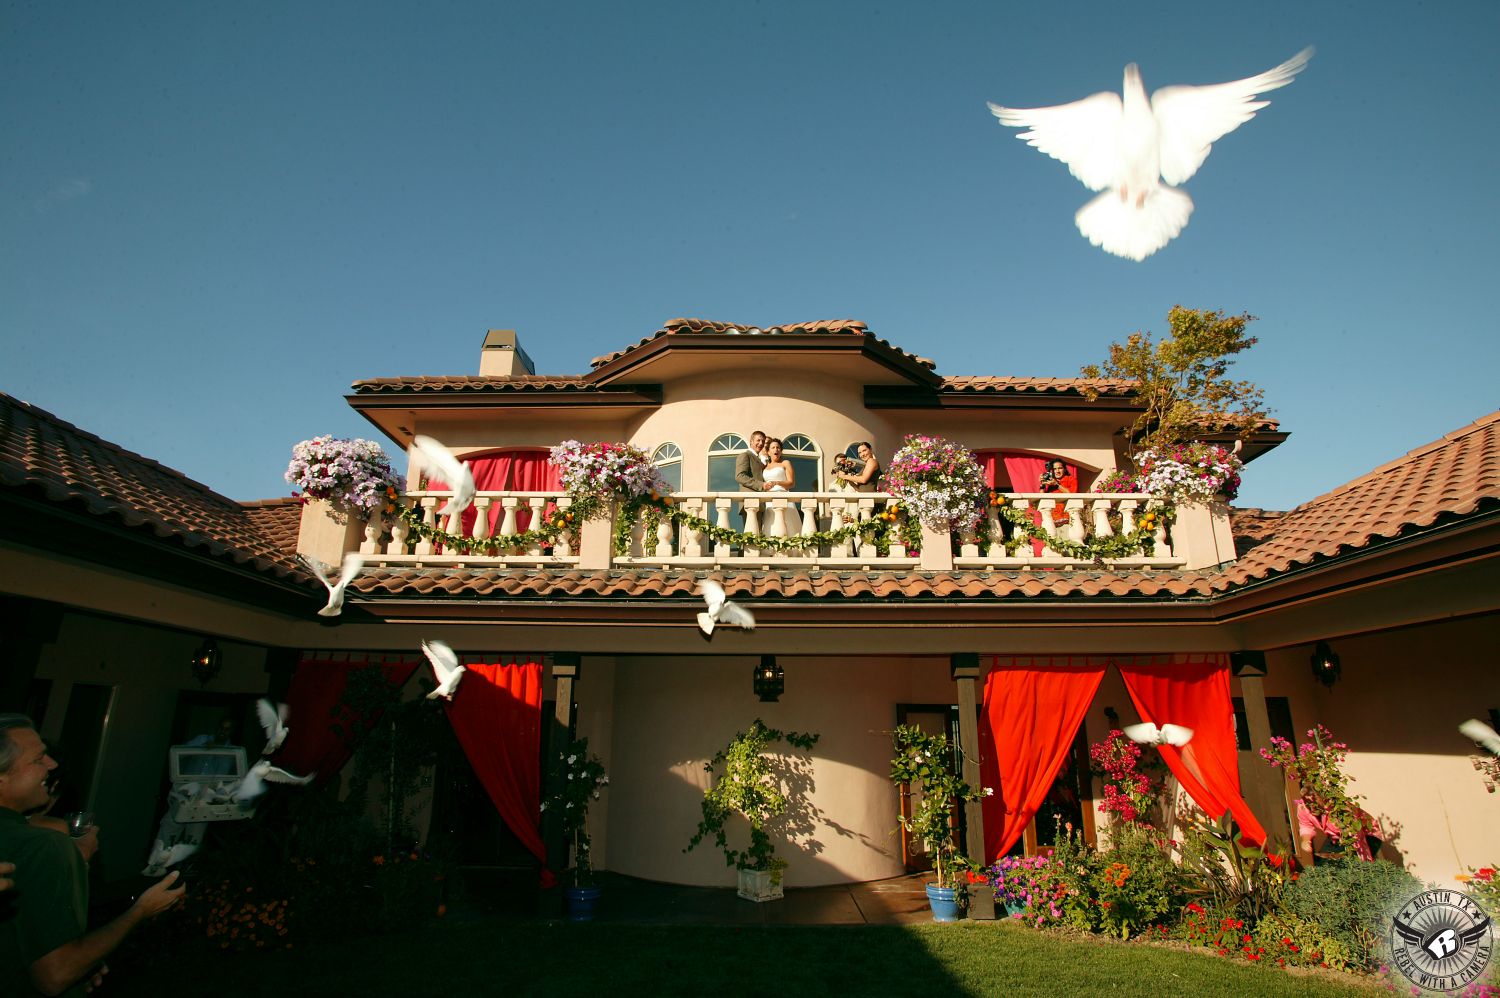 Dove flies and spreads its wings from a dove release as a surprise for the bride at the end of a wedding ceremony at a Tuscan style mansion.